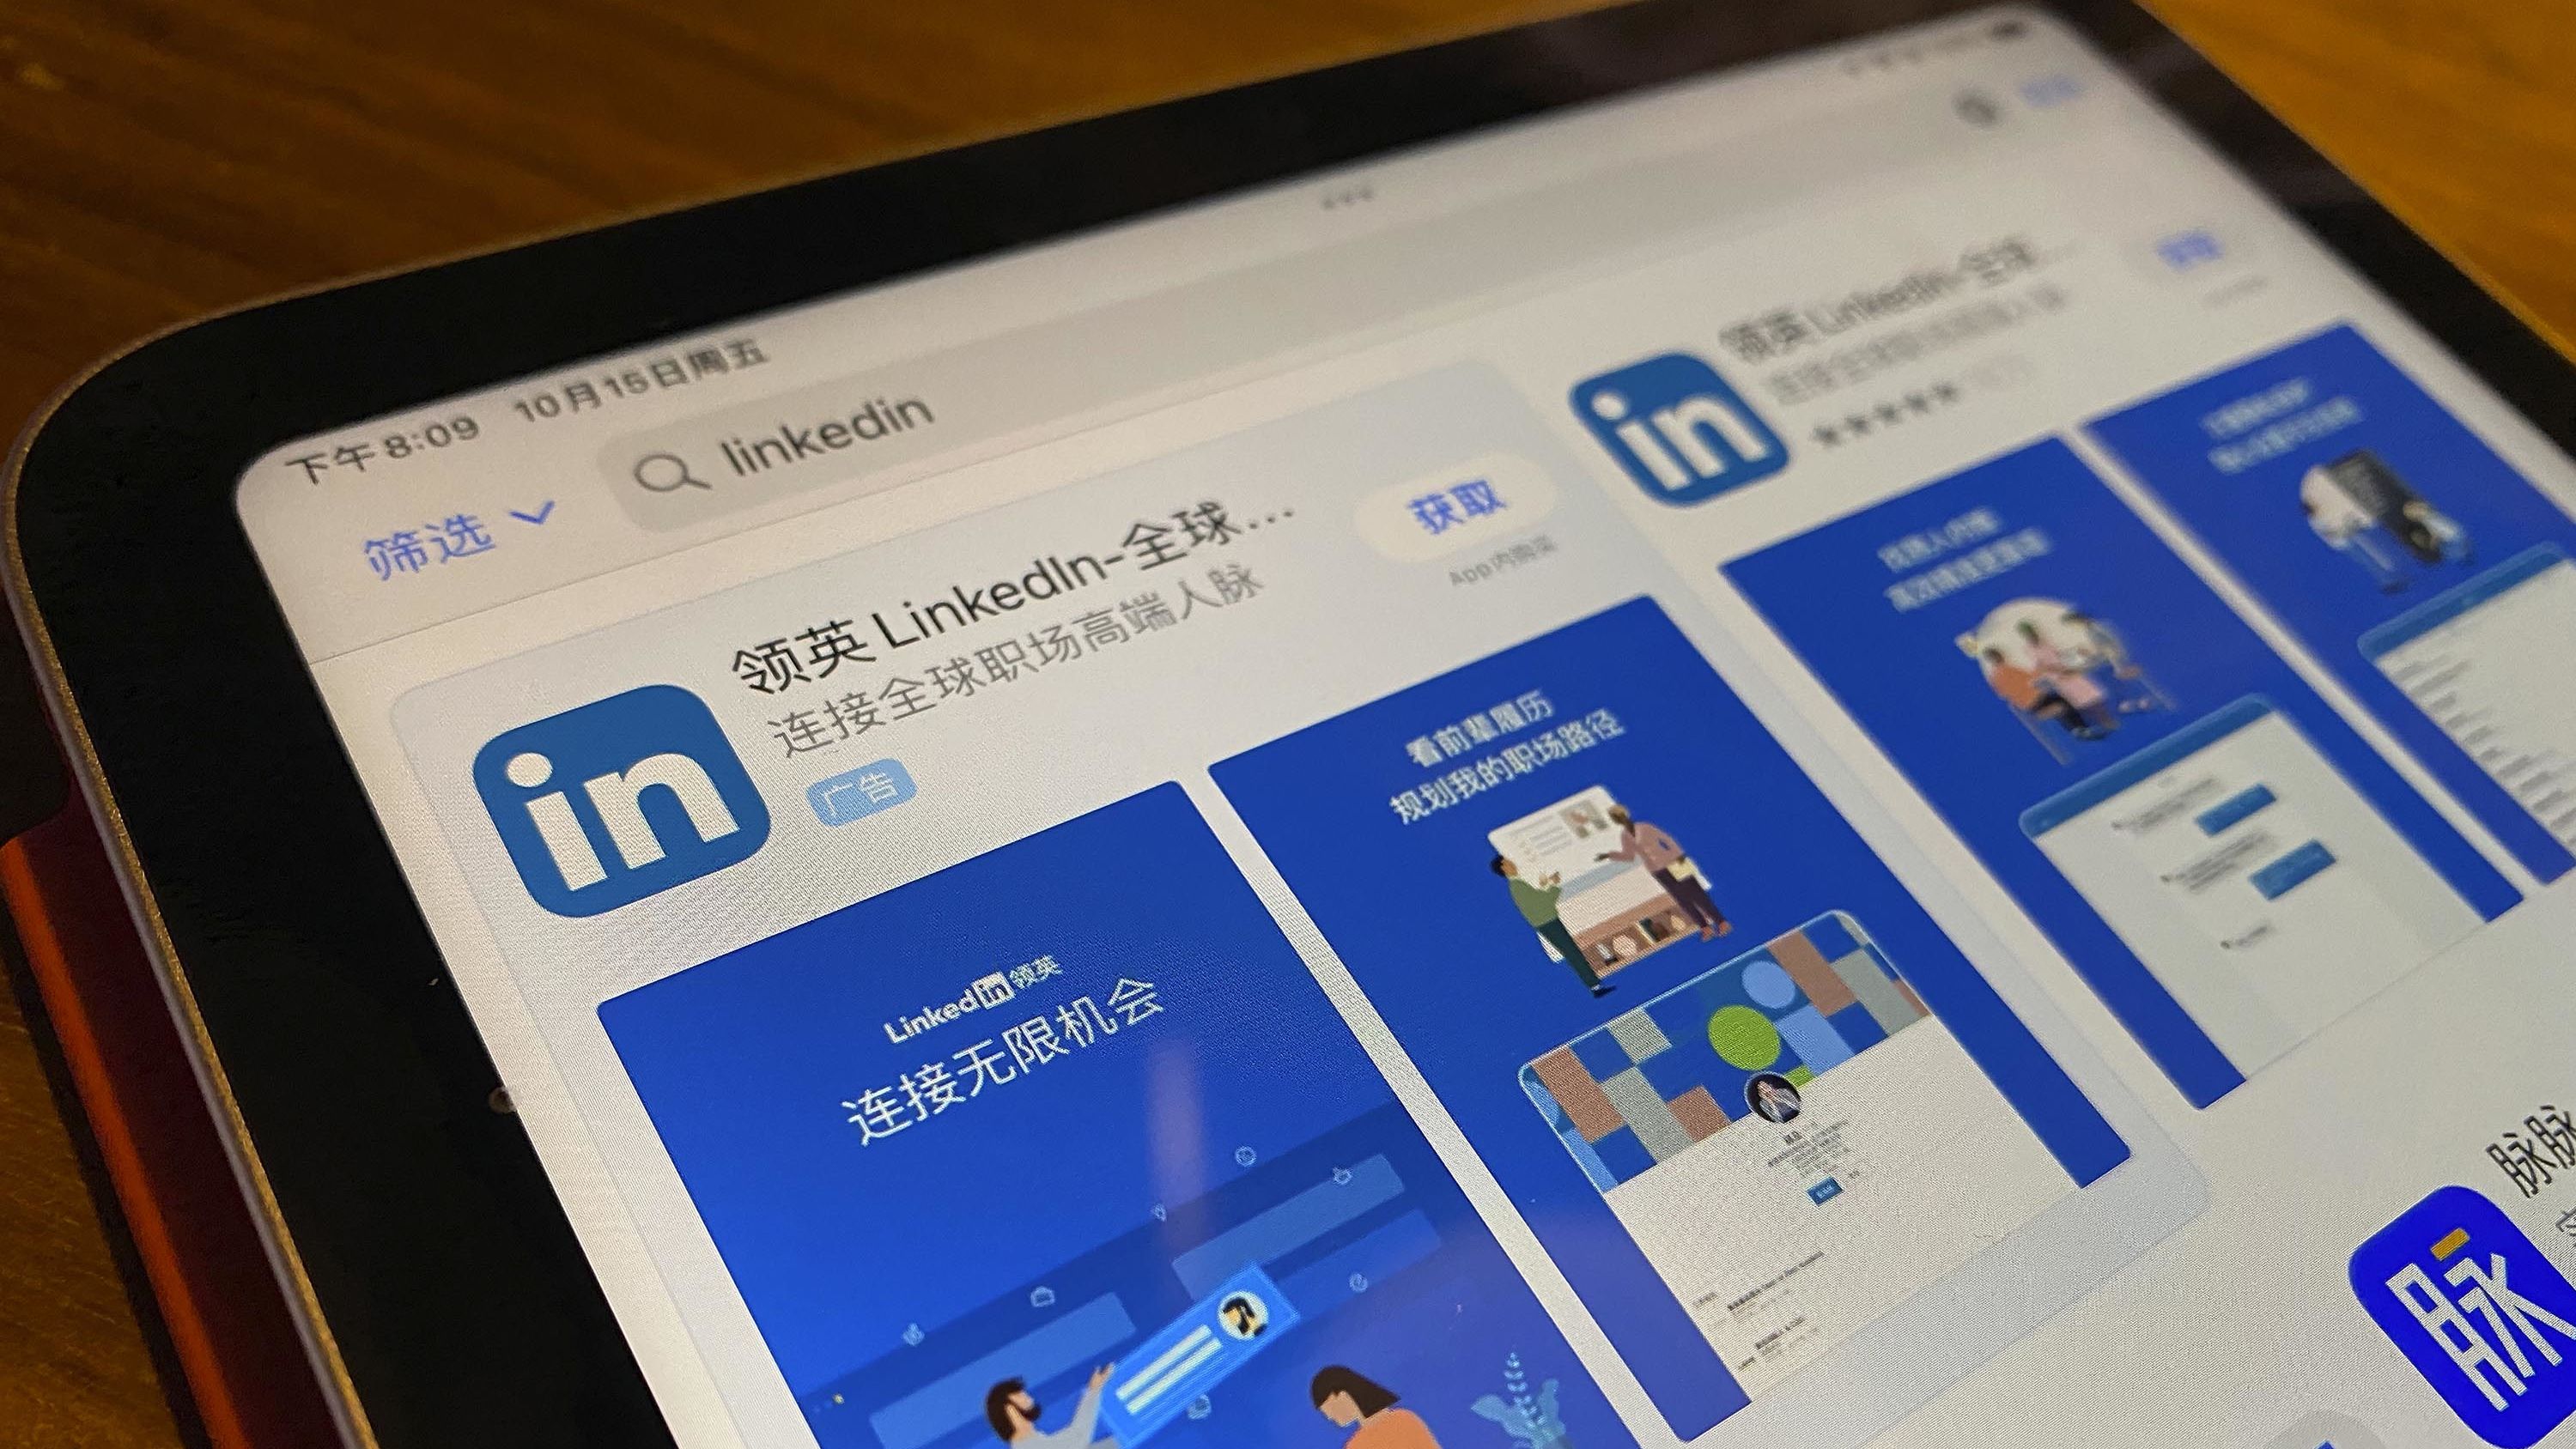 LinkedIn shuts down China-focused job app "InCareer" - What it means for the job market in China?